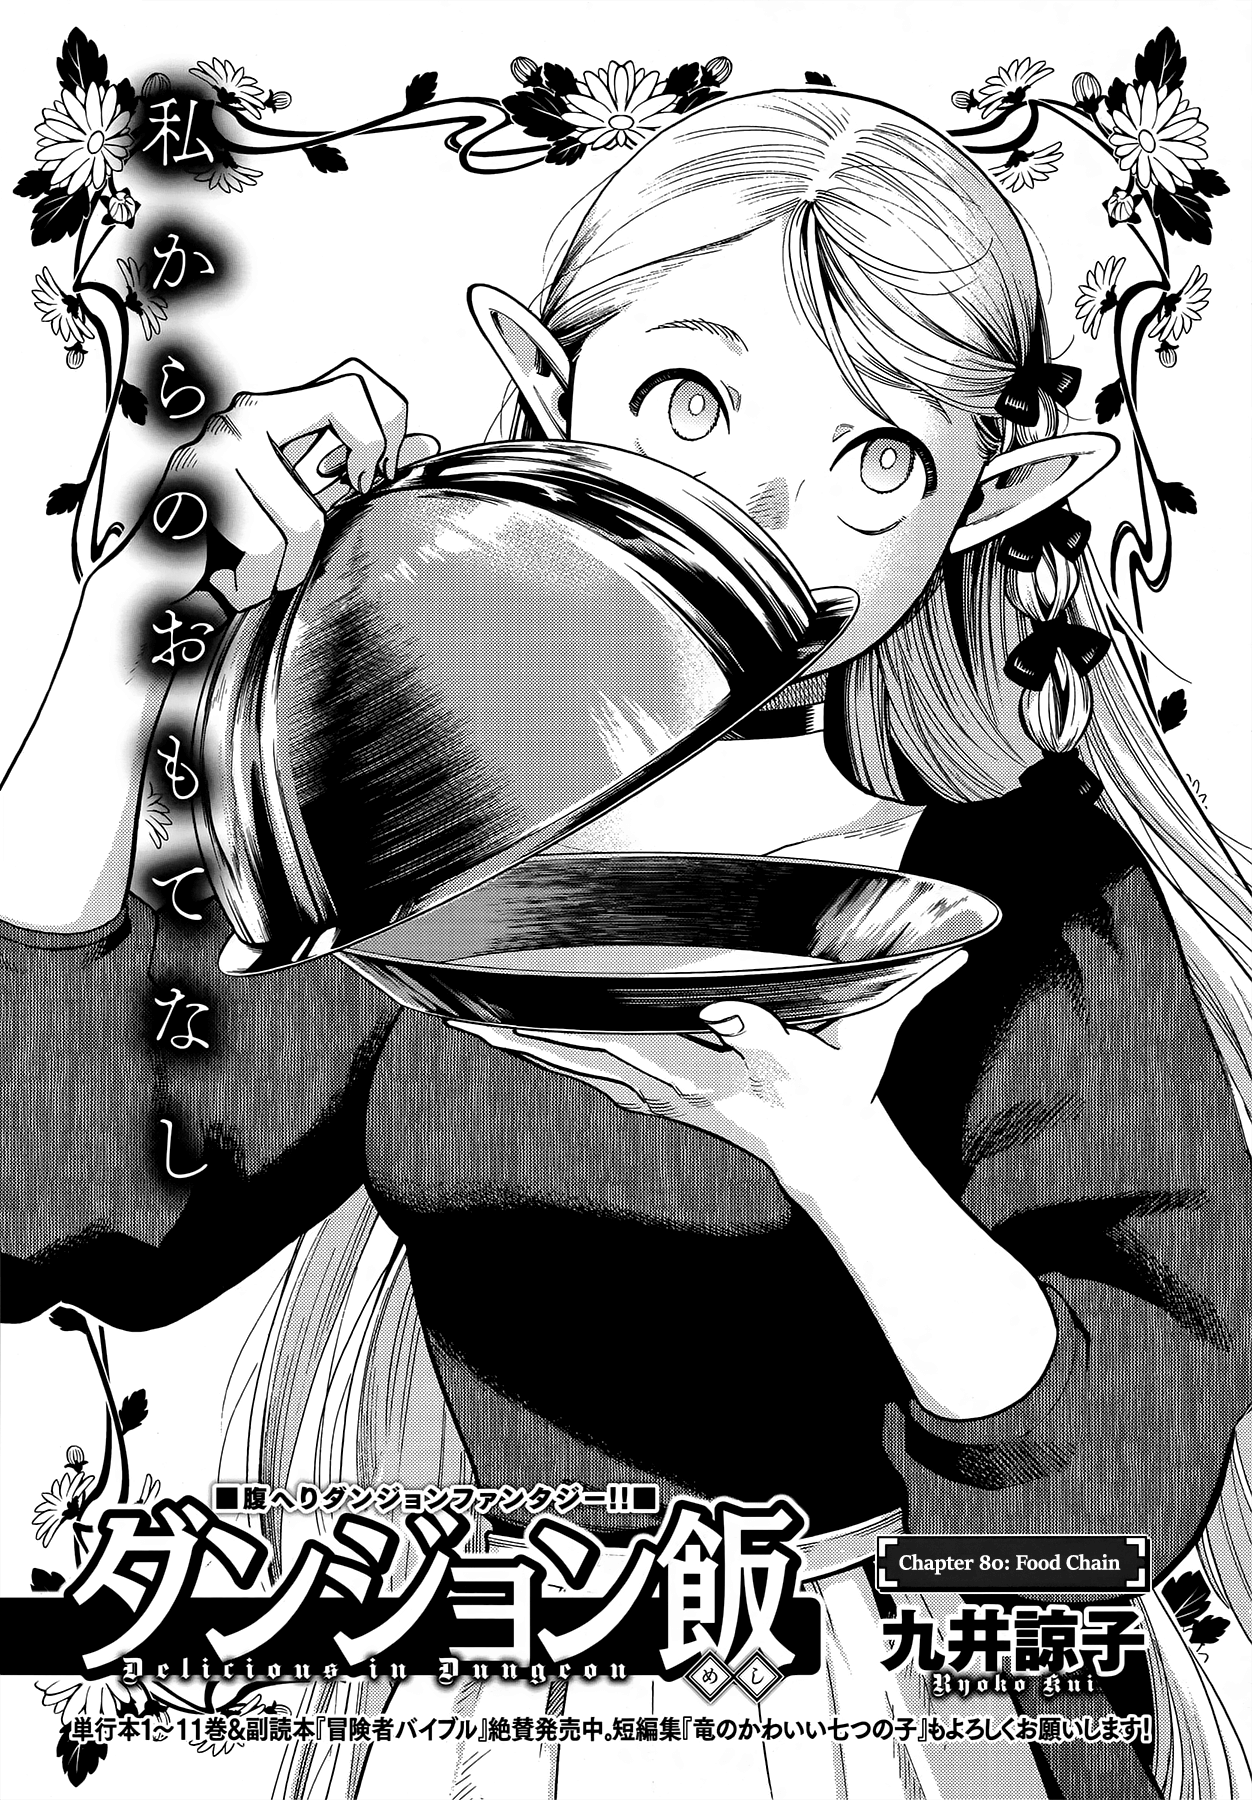 Dungeon Meshi Vol.12-Chapter.80-Food-Chain Image